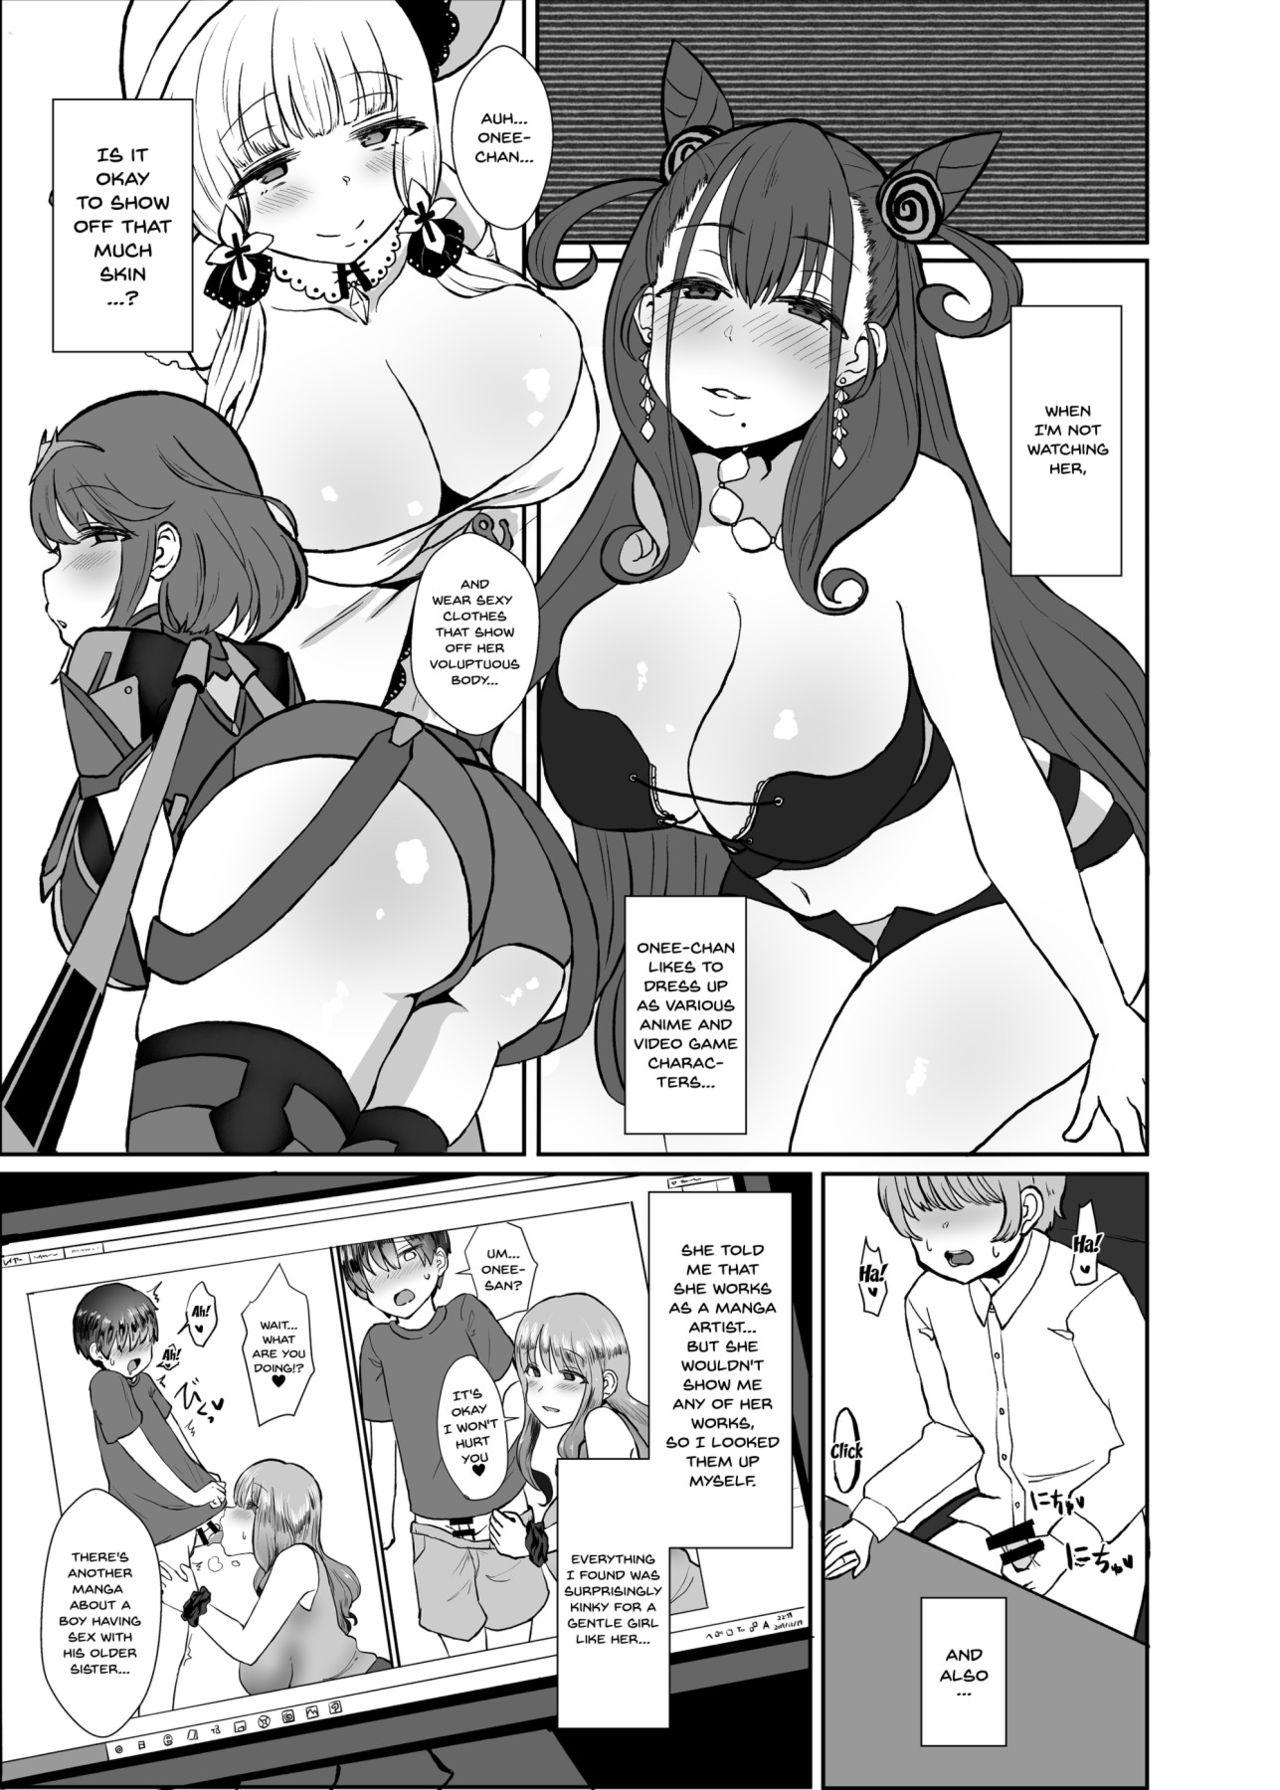 Shaved [Mizore Nabe (Mizore)] Onee-chan no Heya | Onee-chans Room (Fate/Grand Order) [English] {Doujins.com} [Digital] - Fate grand order Hot Fucking - Page 4